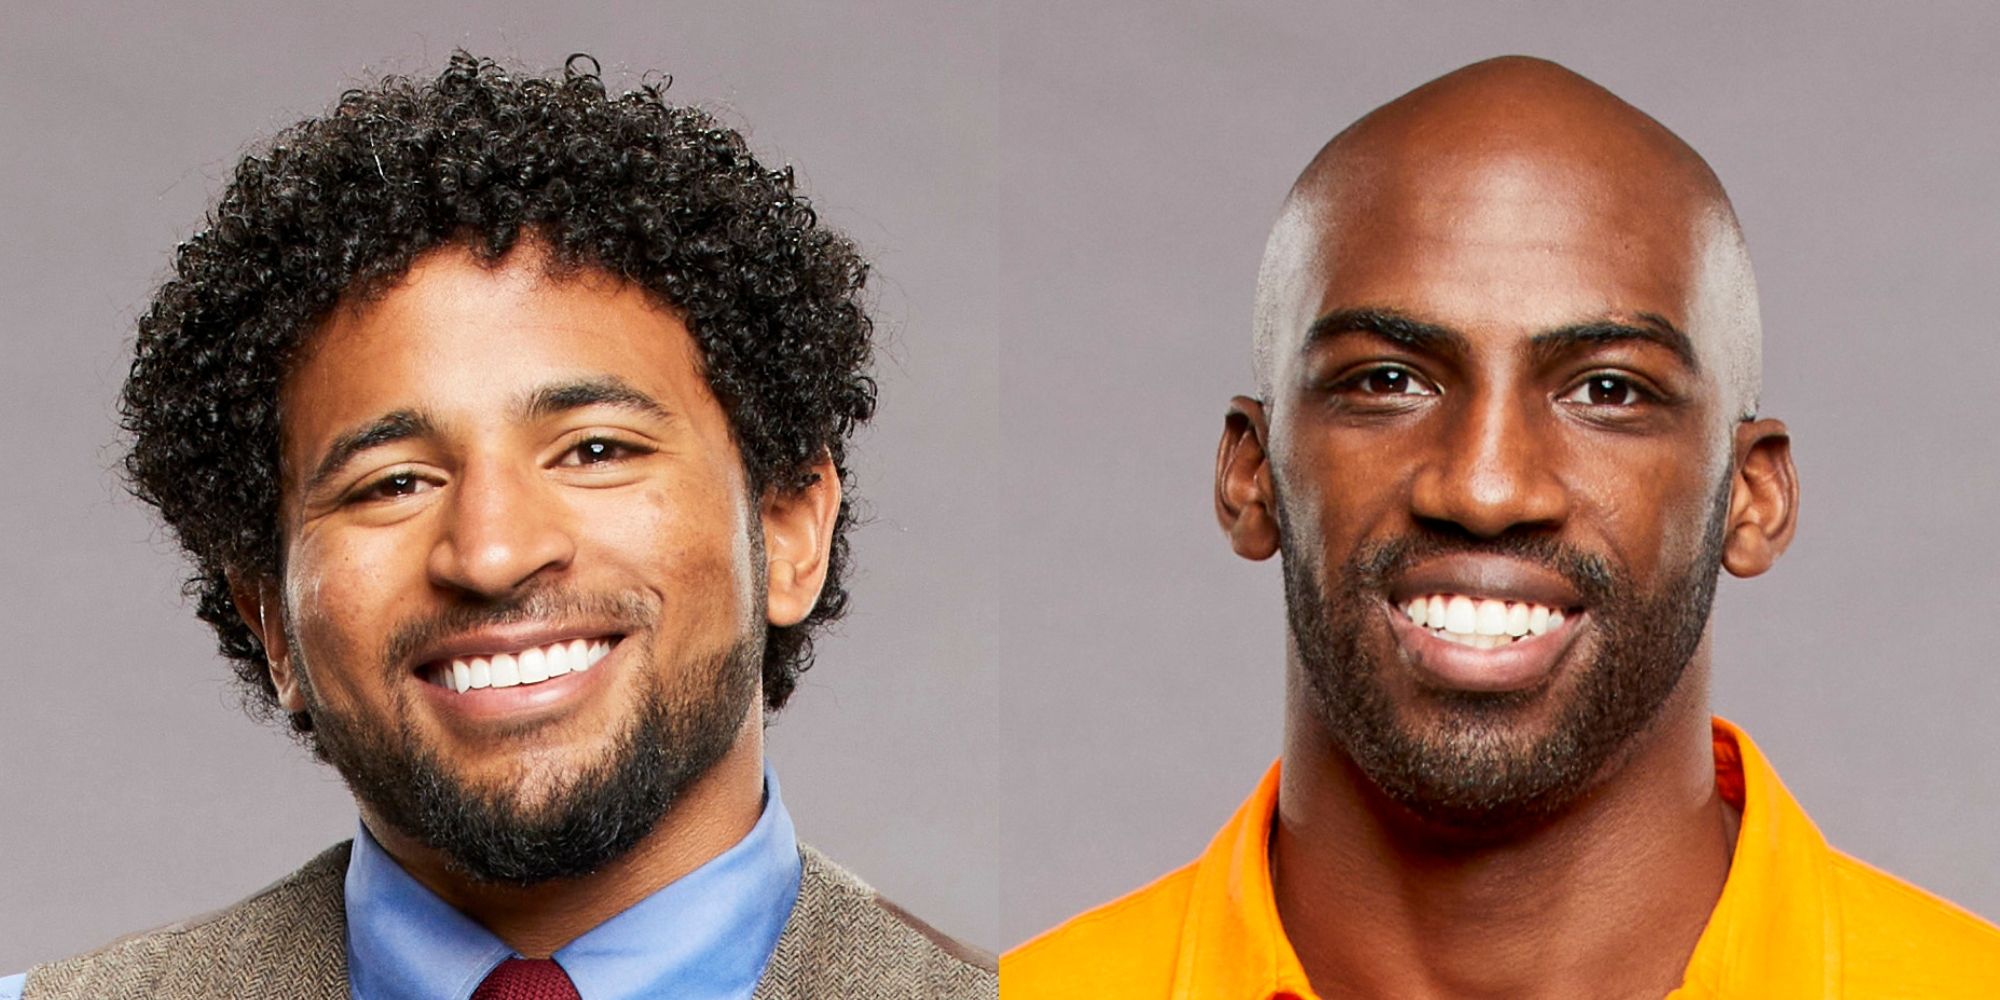 Split image showing Kyland Young and Xavier Prather on Big Brother 23.